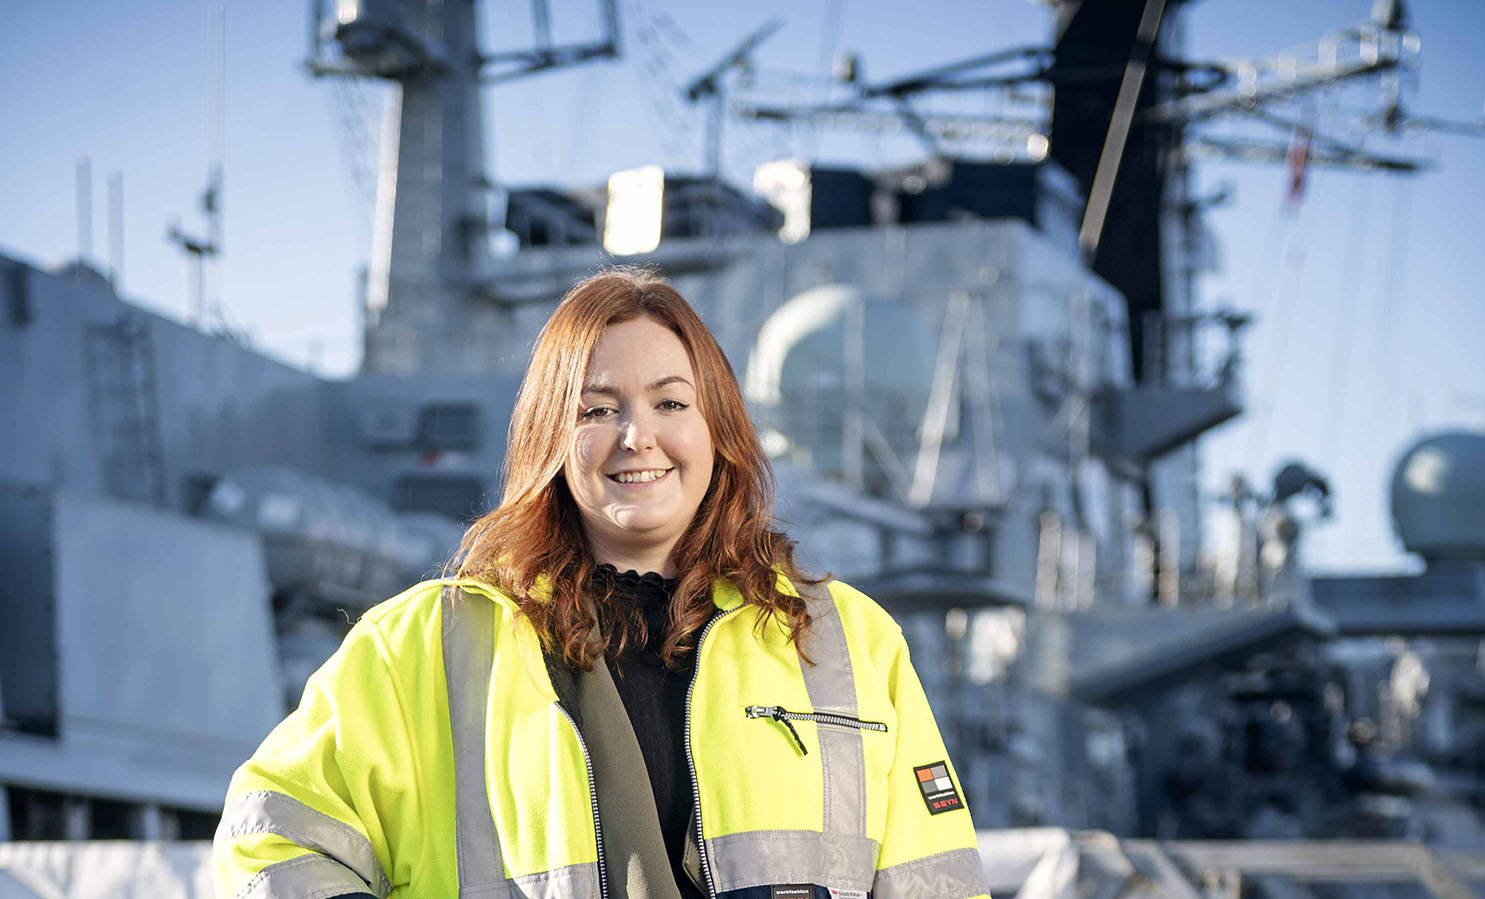 A woman in a high visibility jacket stands in front of a large grey navy ship